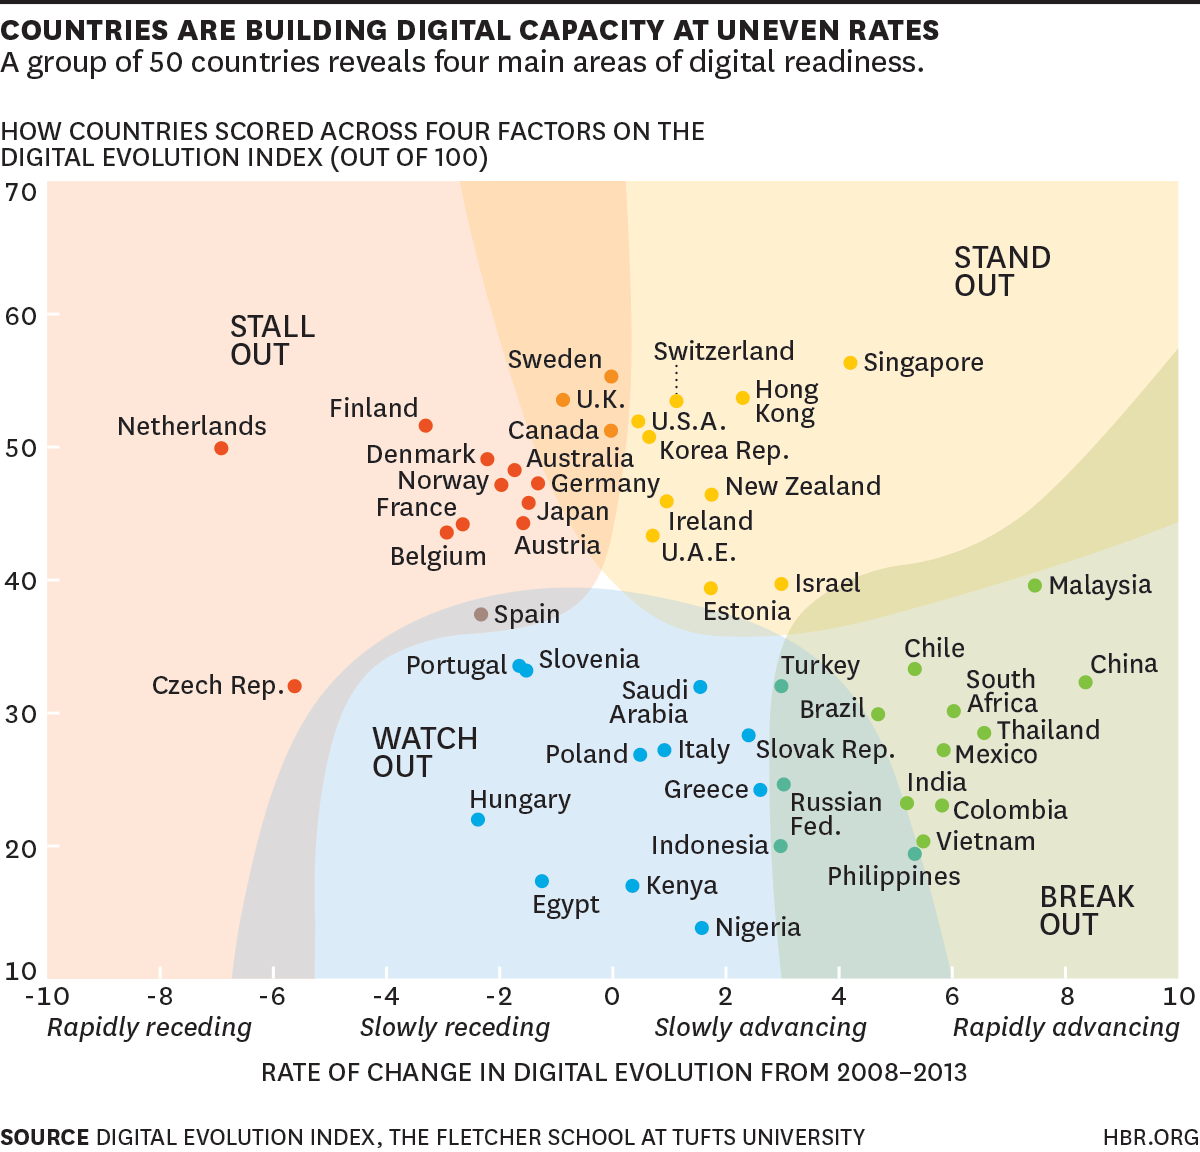 https://hbr.org/2015/02/where-the-digital-economy-is-moving-the-fastest#b03g06t20w15